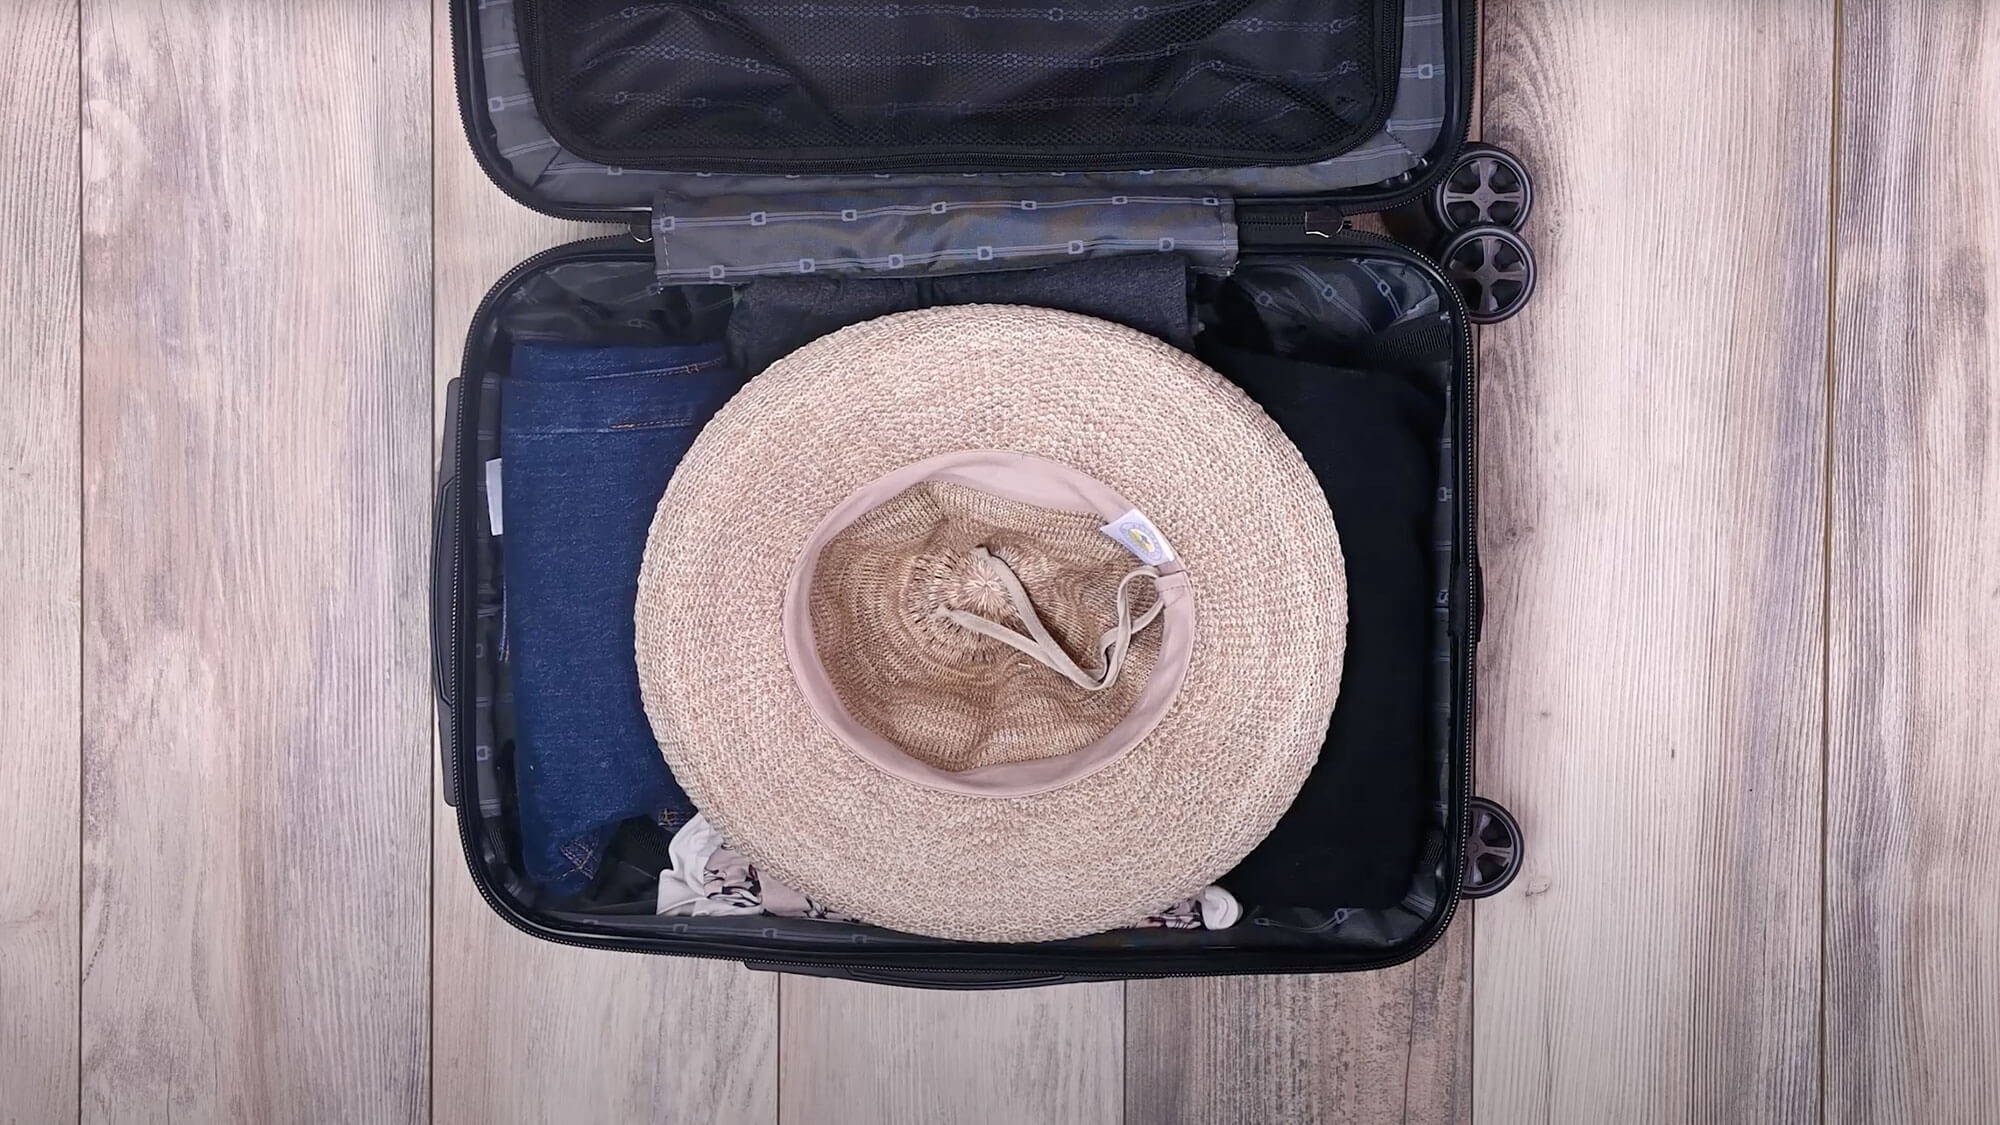 Stuffing a hat in luggage for travel